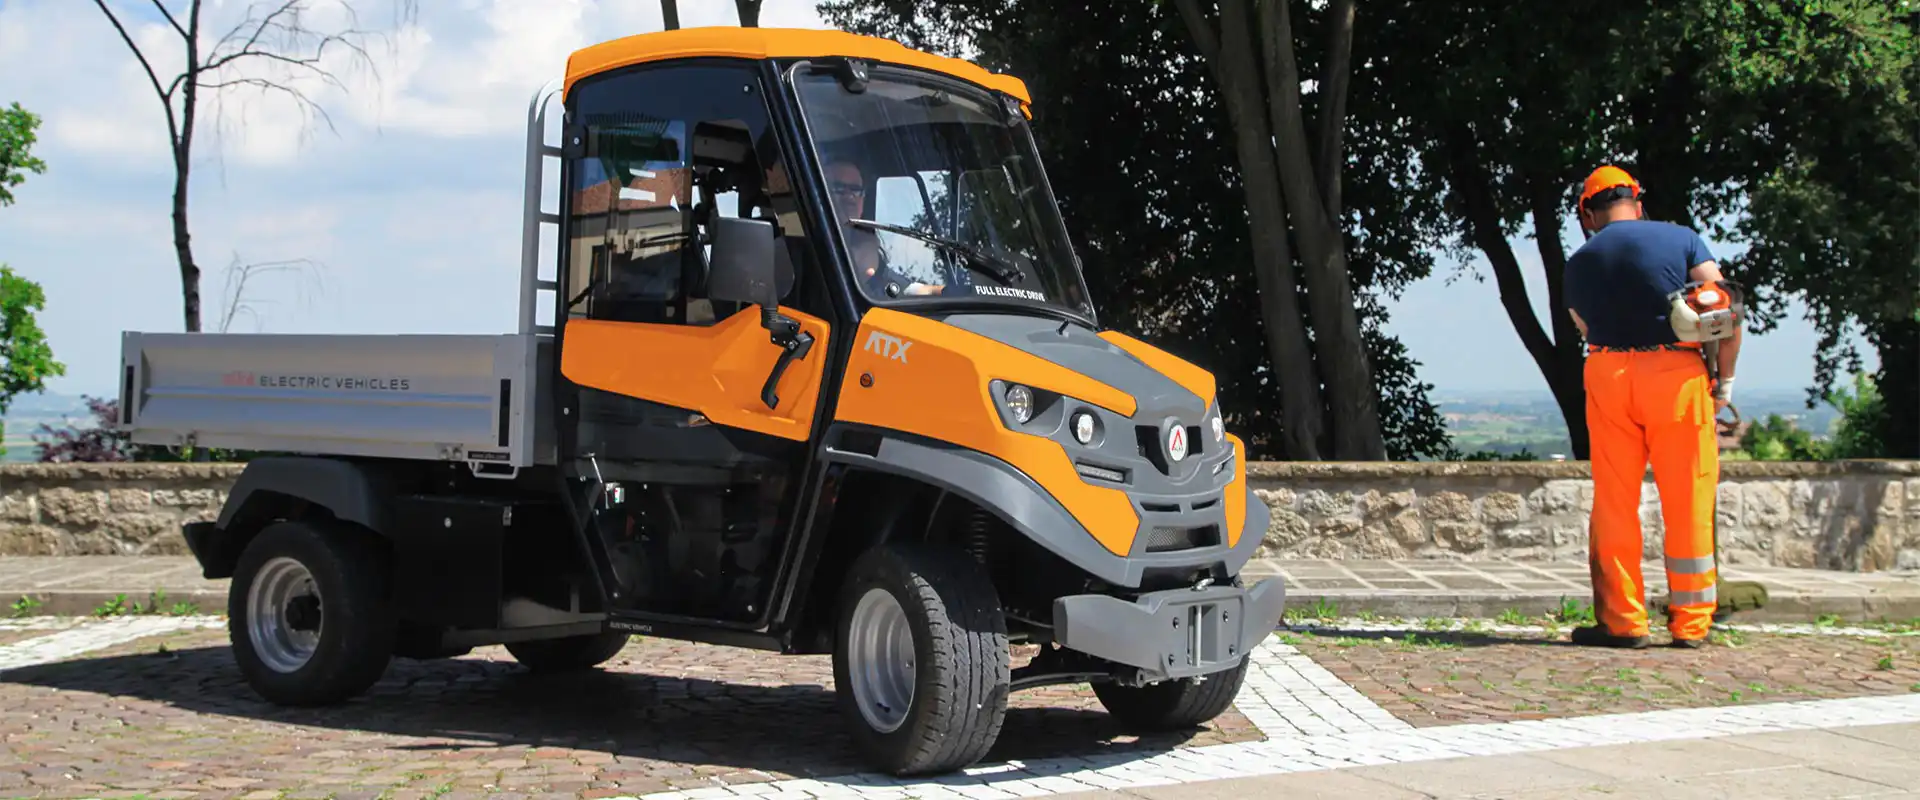 Electric utility vehicles for parks and gardens Alkè